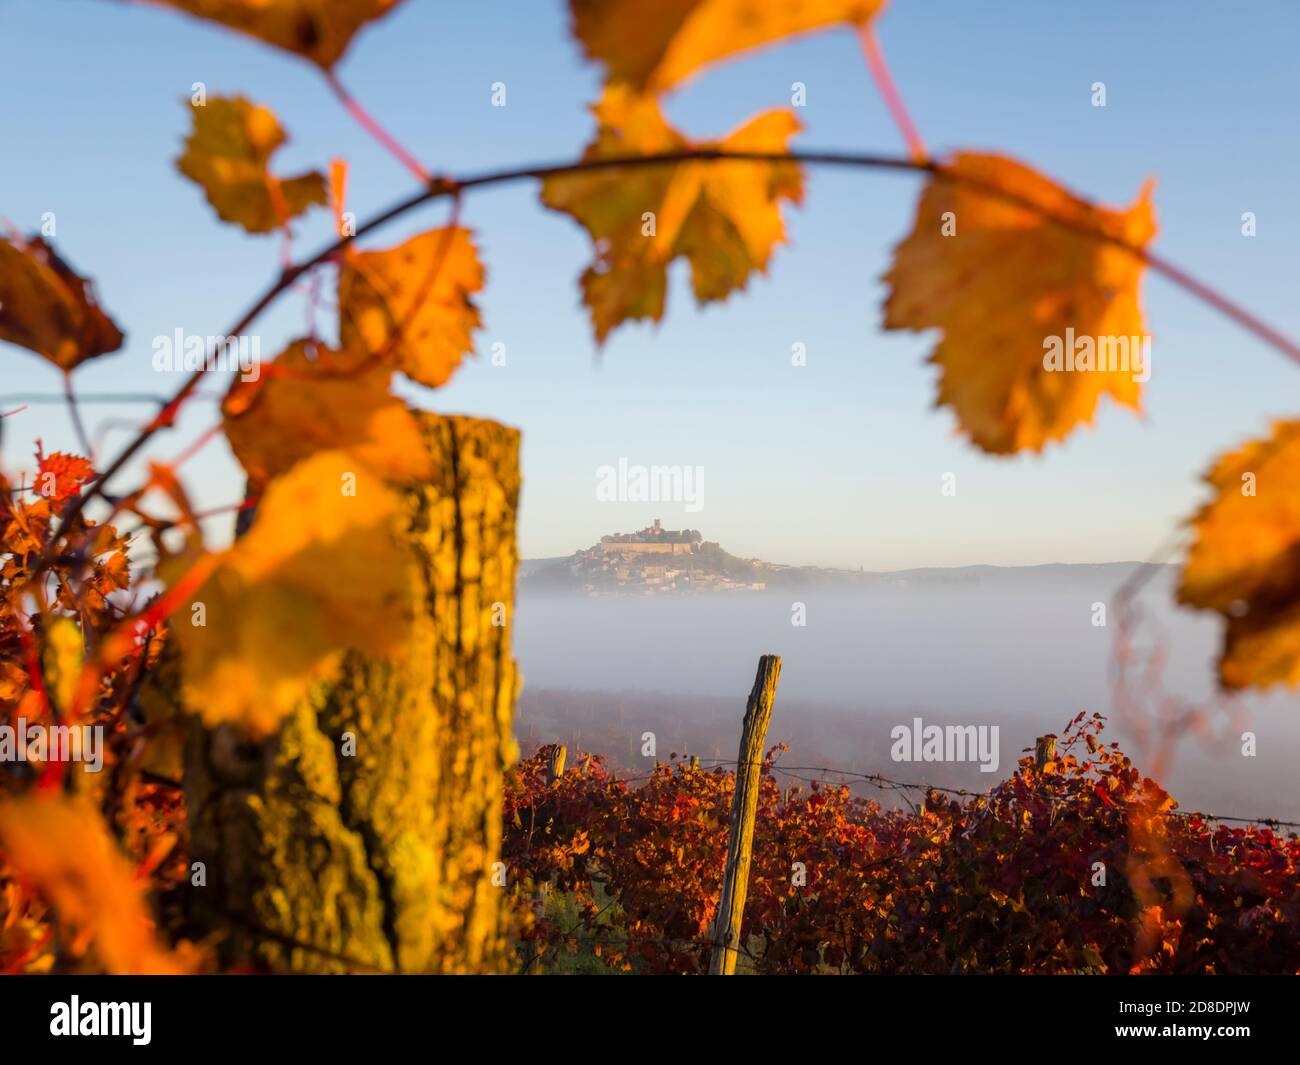 Arch arched framed frame by grapevine branch with leaves and Red Autumnal vineyard leaves focus on oldtown Motovun in Istria Croatia Europe Stock Photo